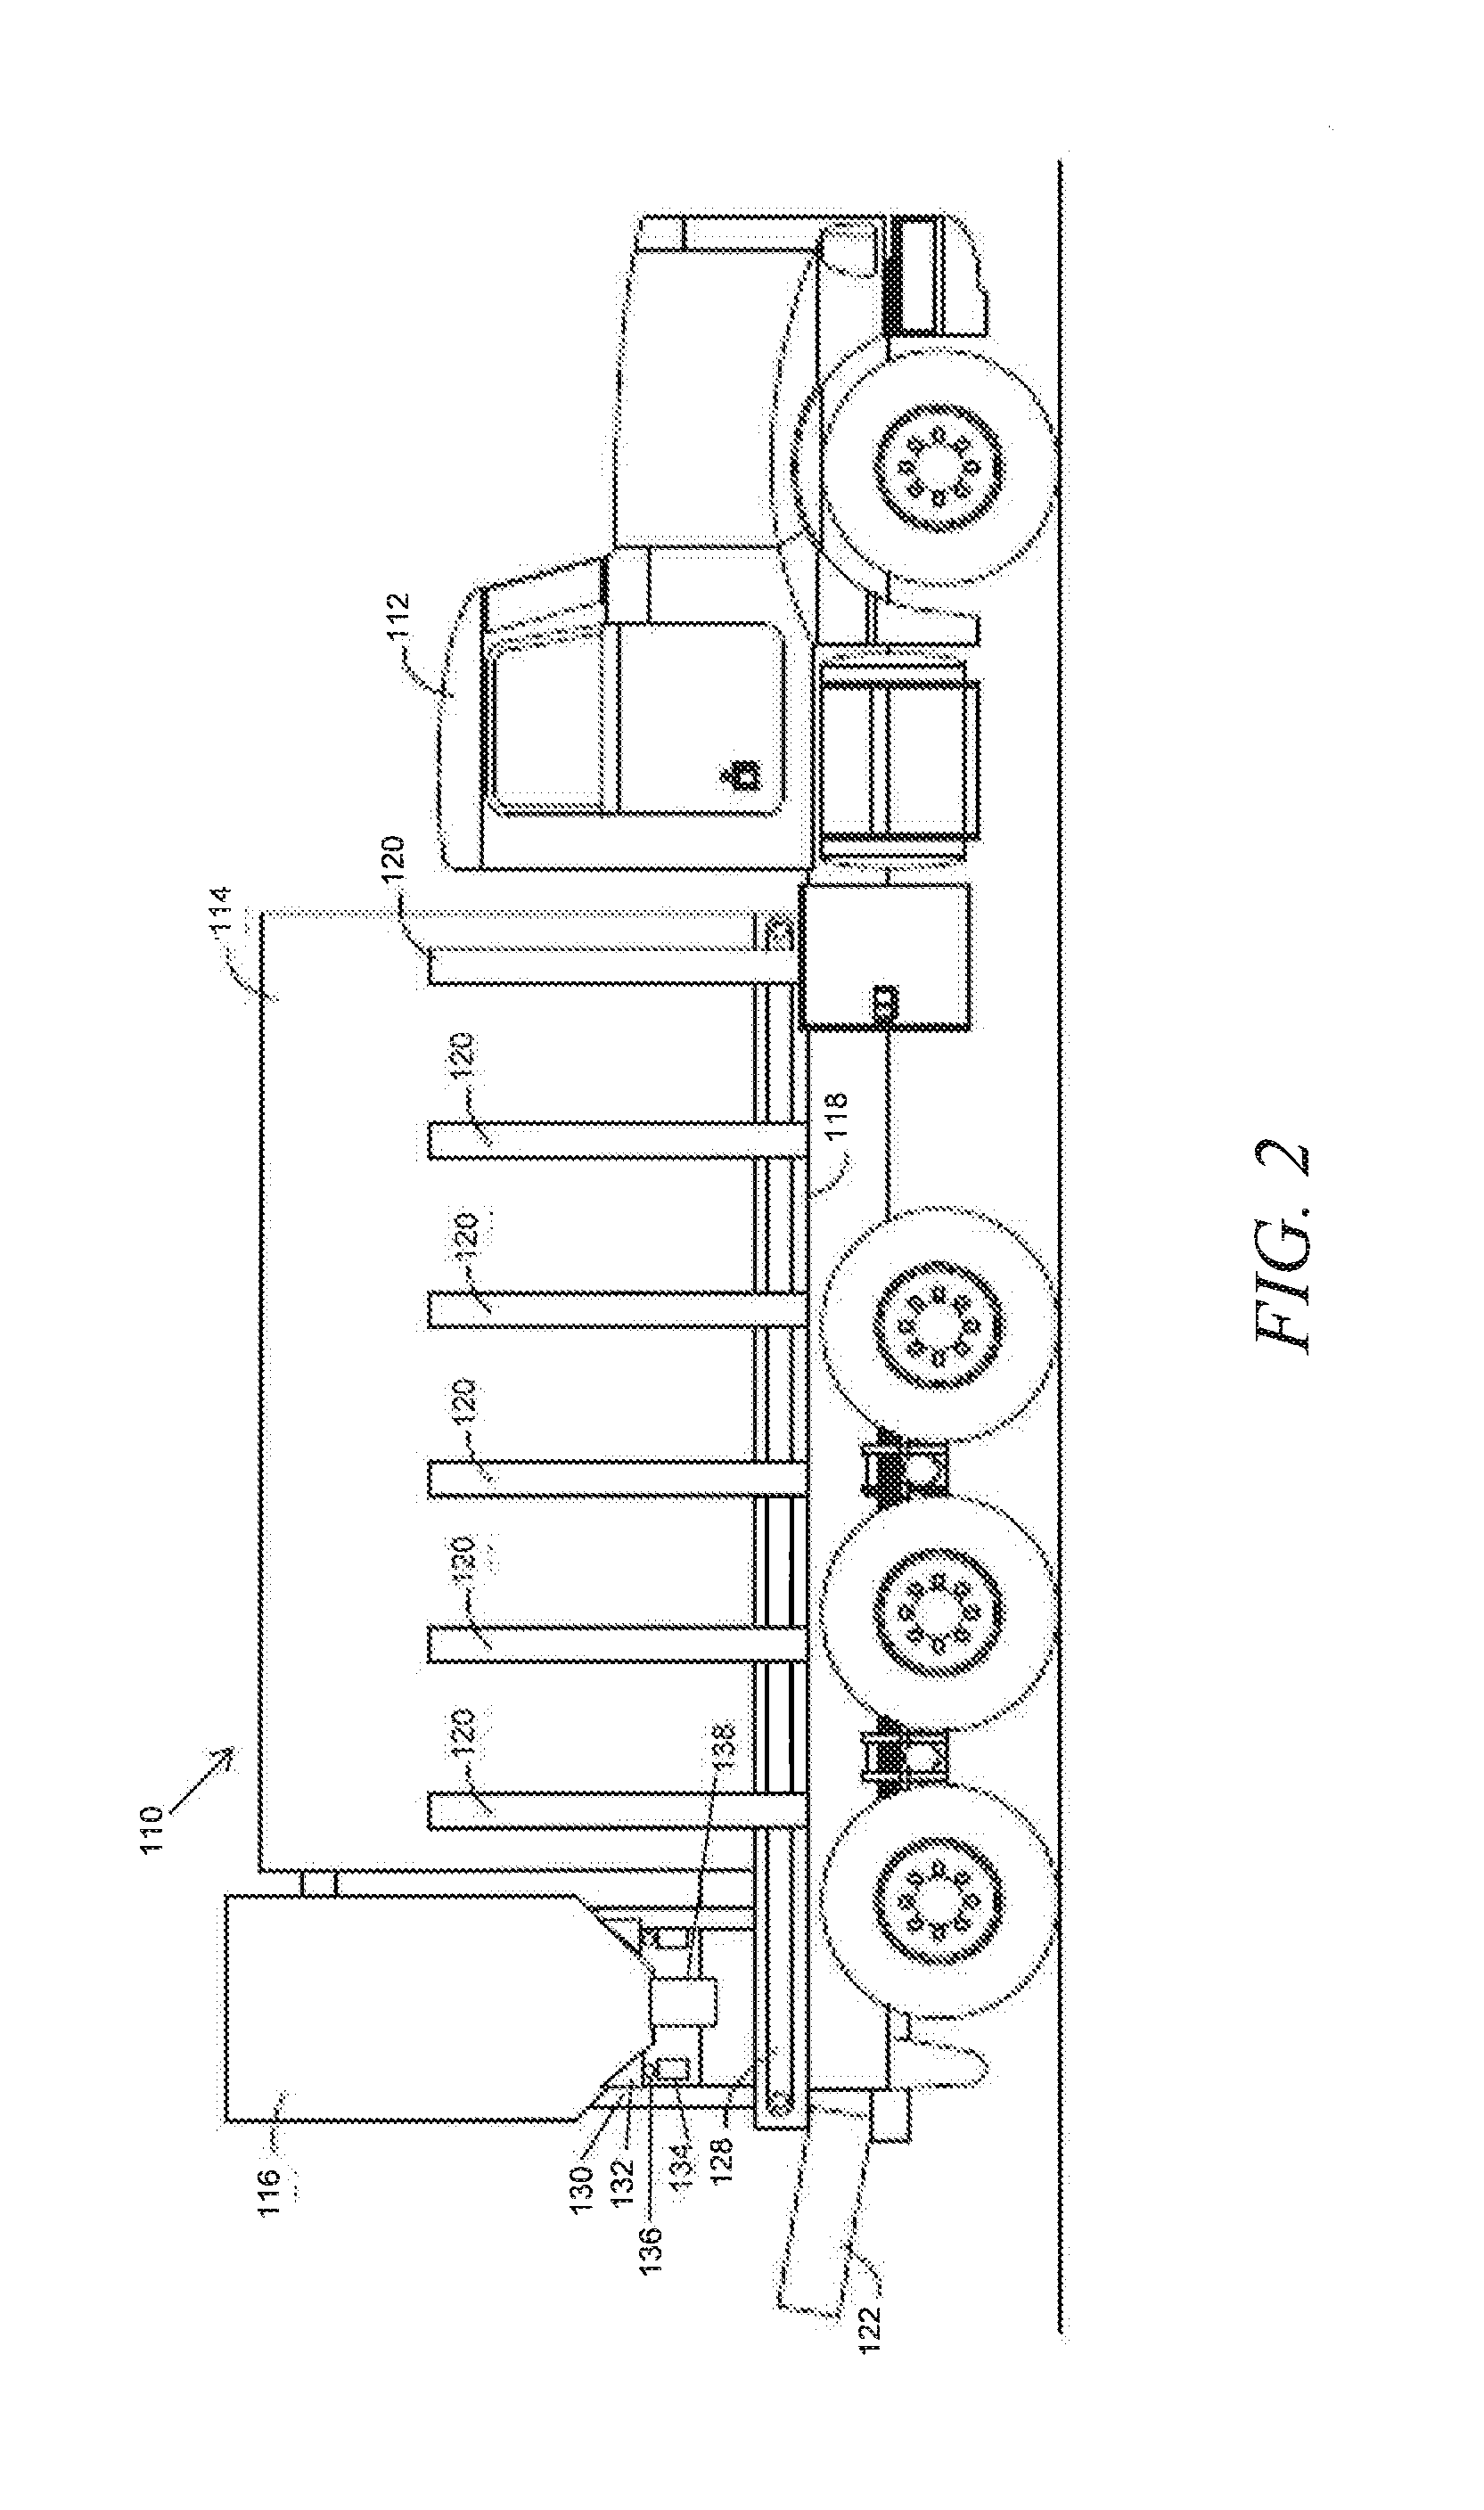 Volumetric mixer with monitoring system and control system